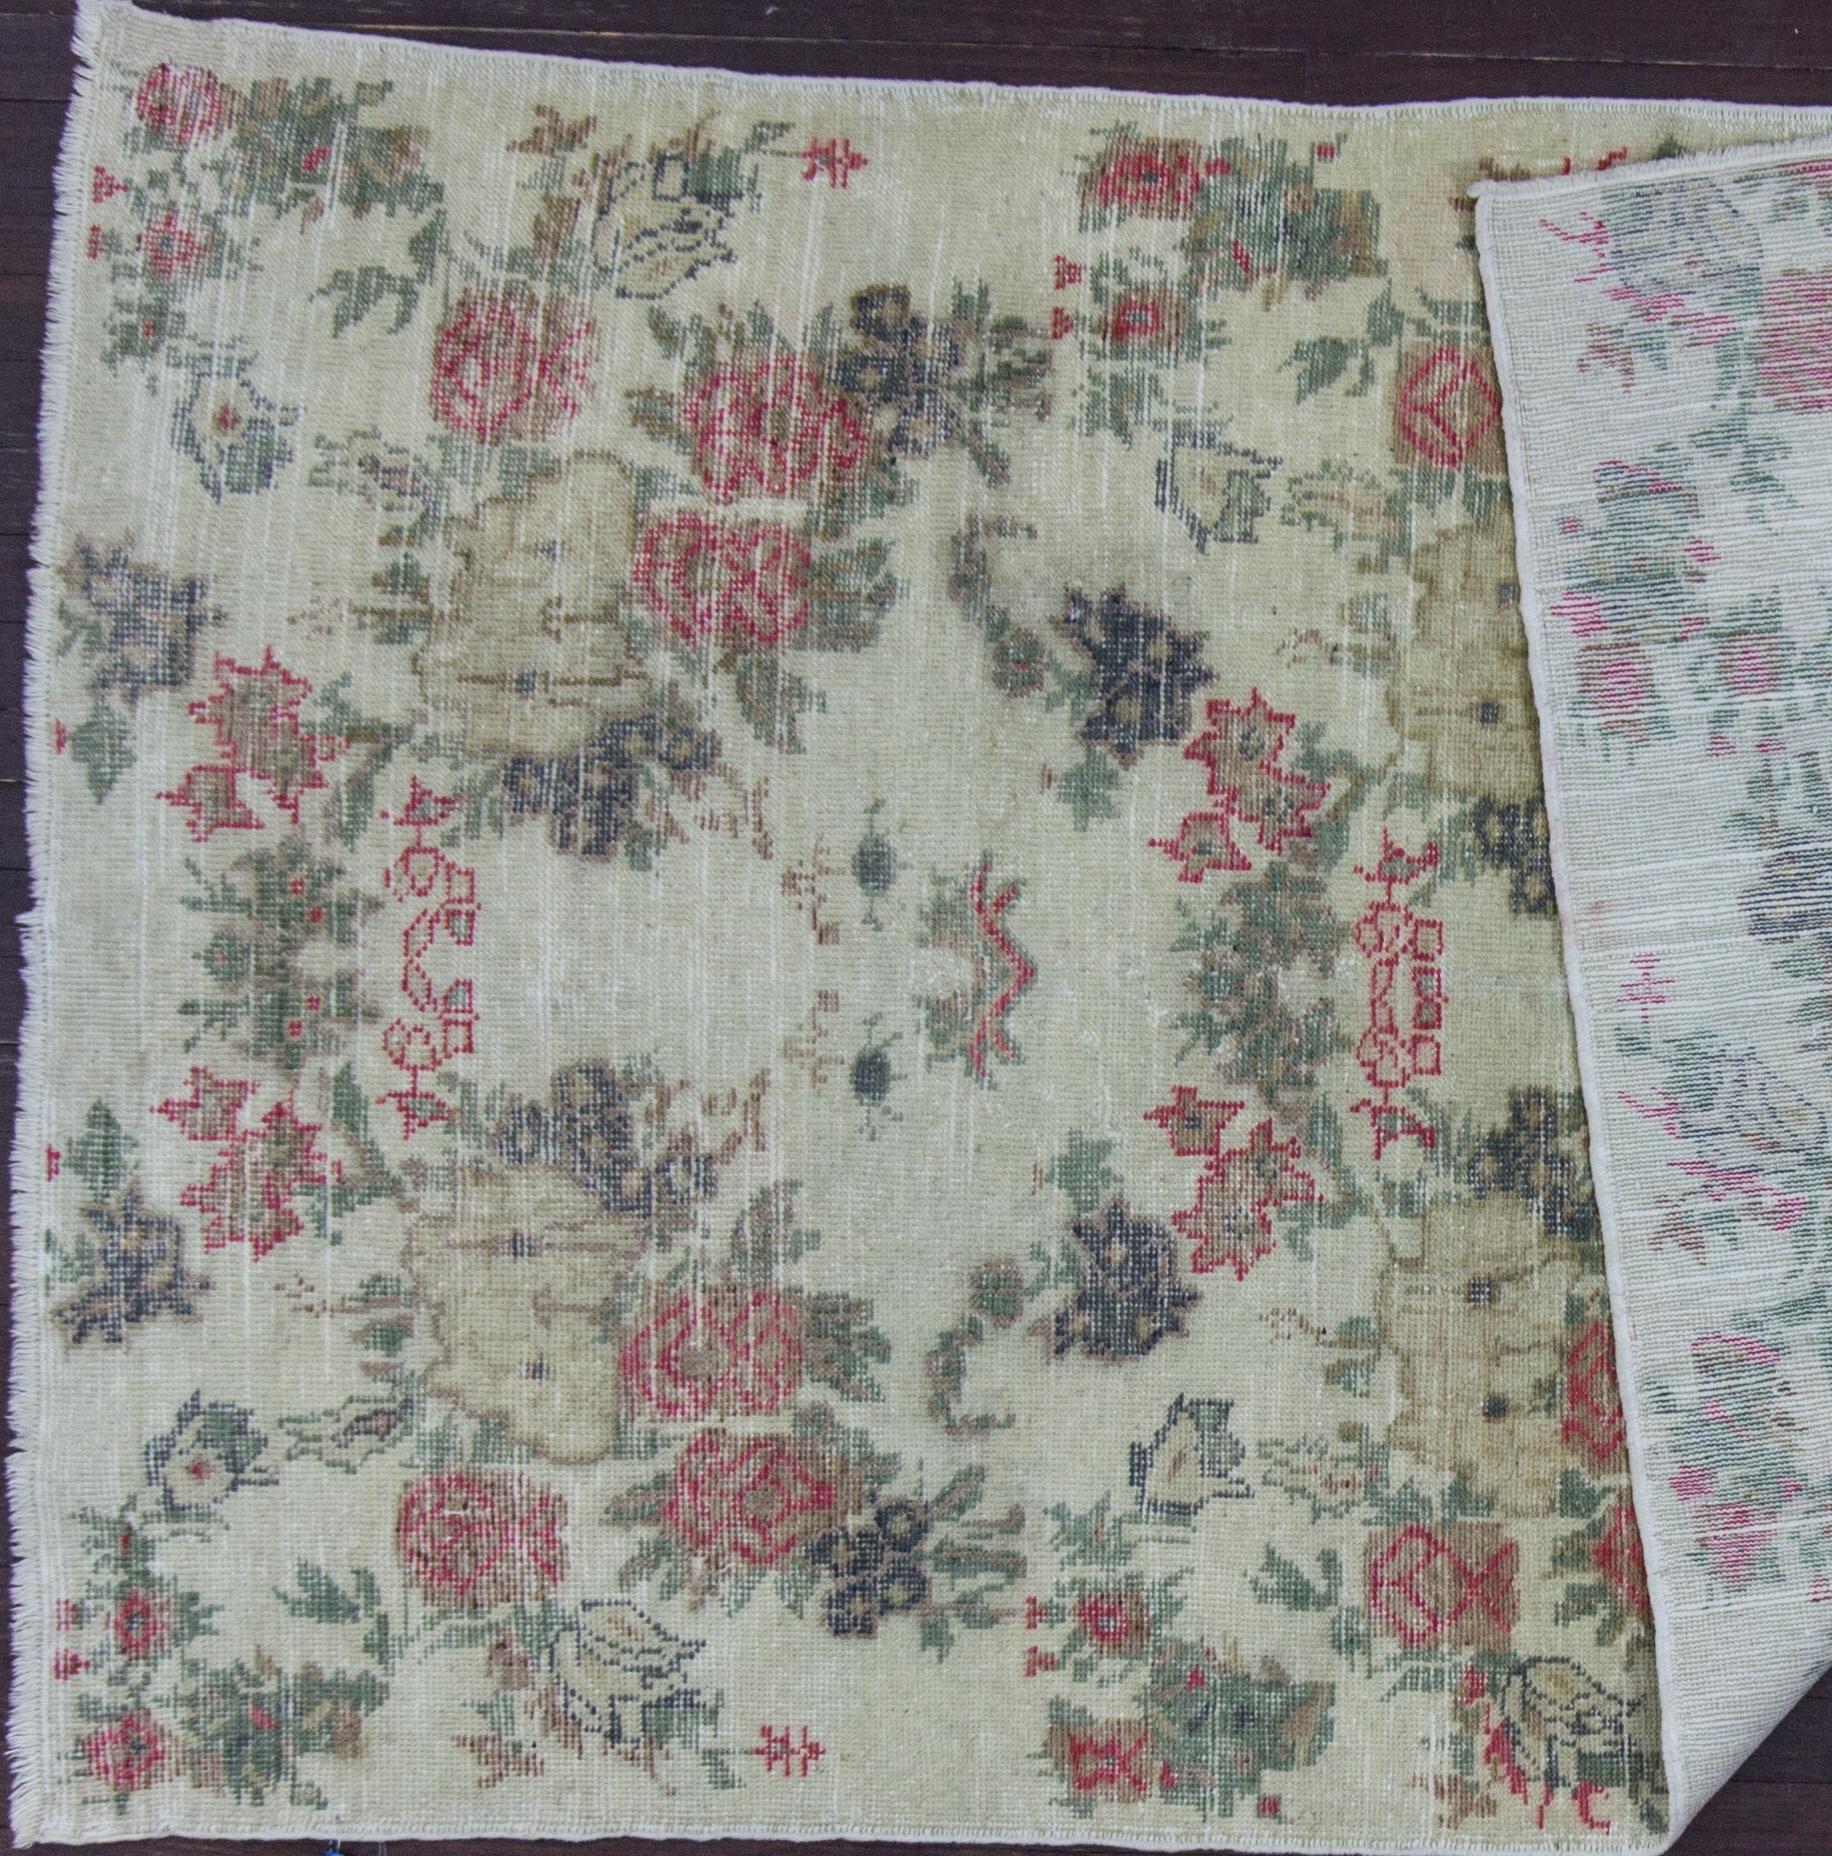 Antique handwoven wool Oushak rug with floral motif. Minor wear. Measures: 3'11